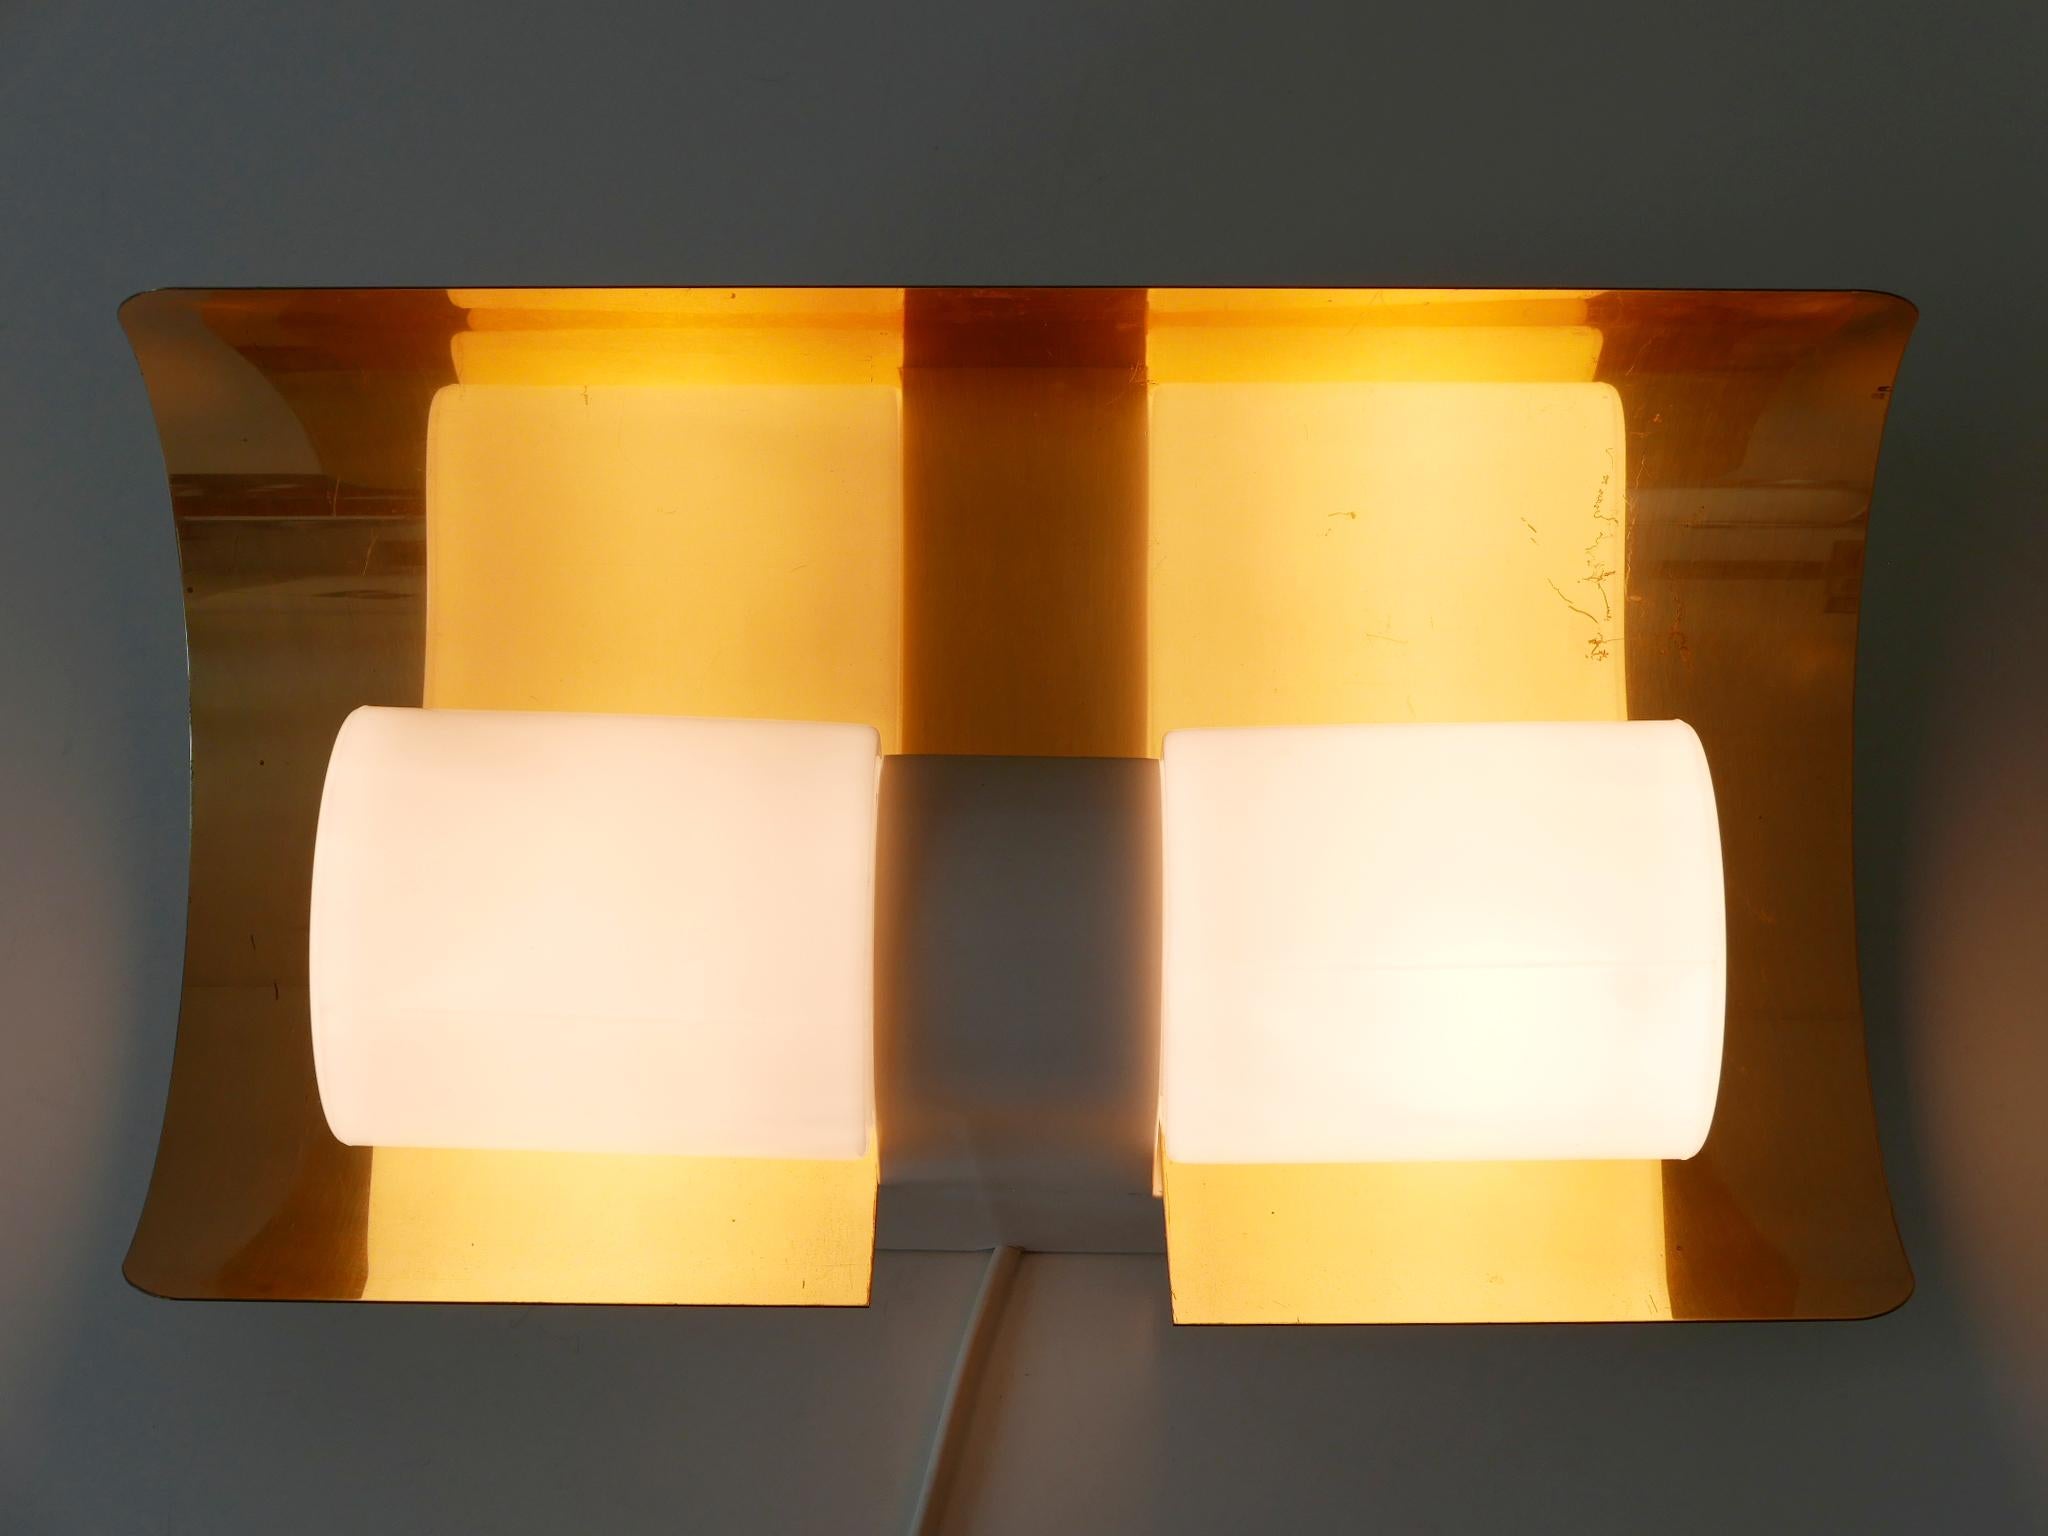 Rare, elegant and highly decorative Mid-Century Modern sconce or wall fixture. Designed by Hans-Agne Jakobsson for AB Markaryd, Sweden, 1950s. Marked with makers label revers.

Executed in brass, opaline glass and plastic, the sconce is executed